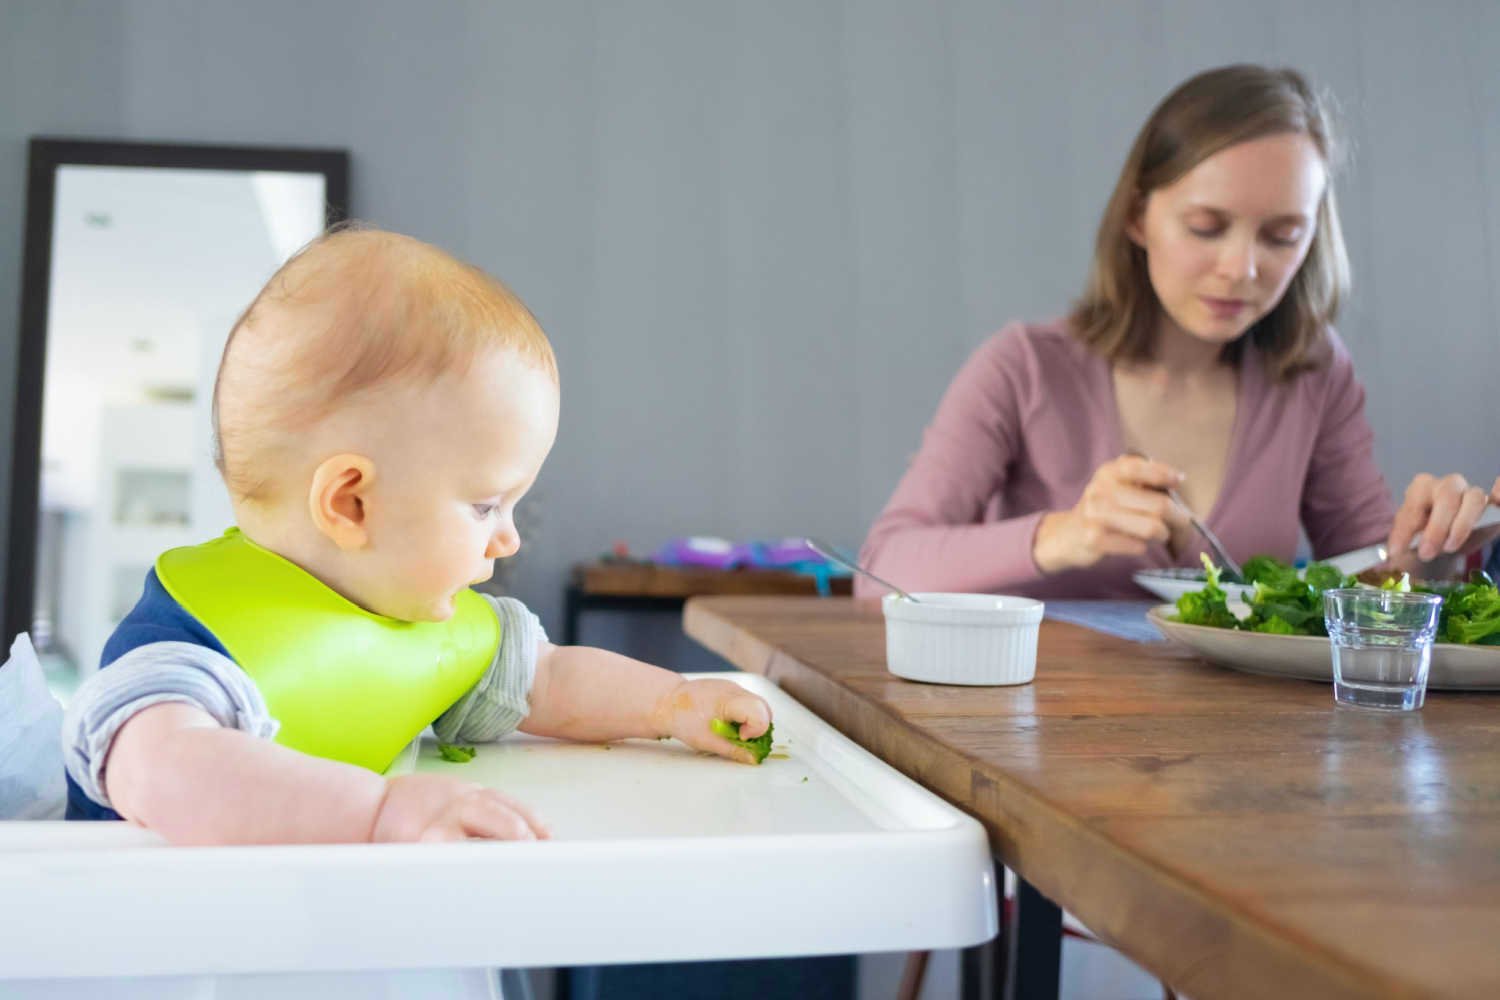 Tips For Your Baby to Self-Feed